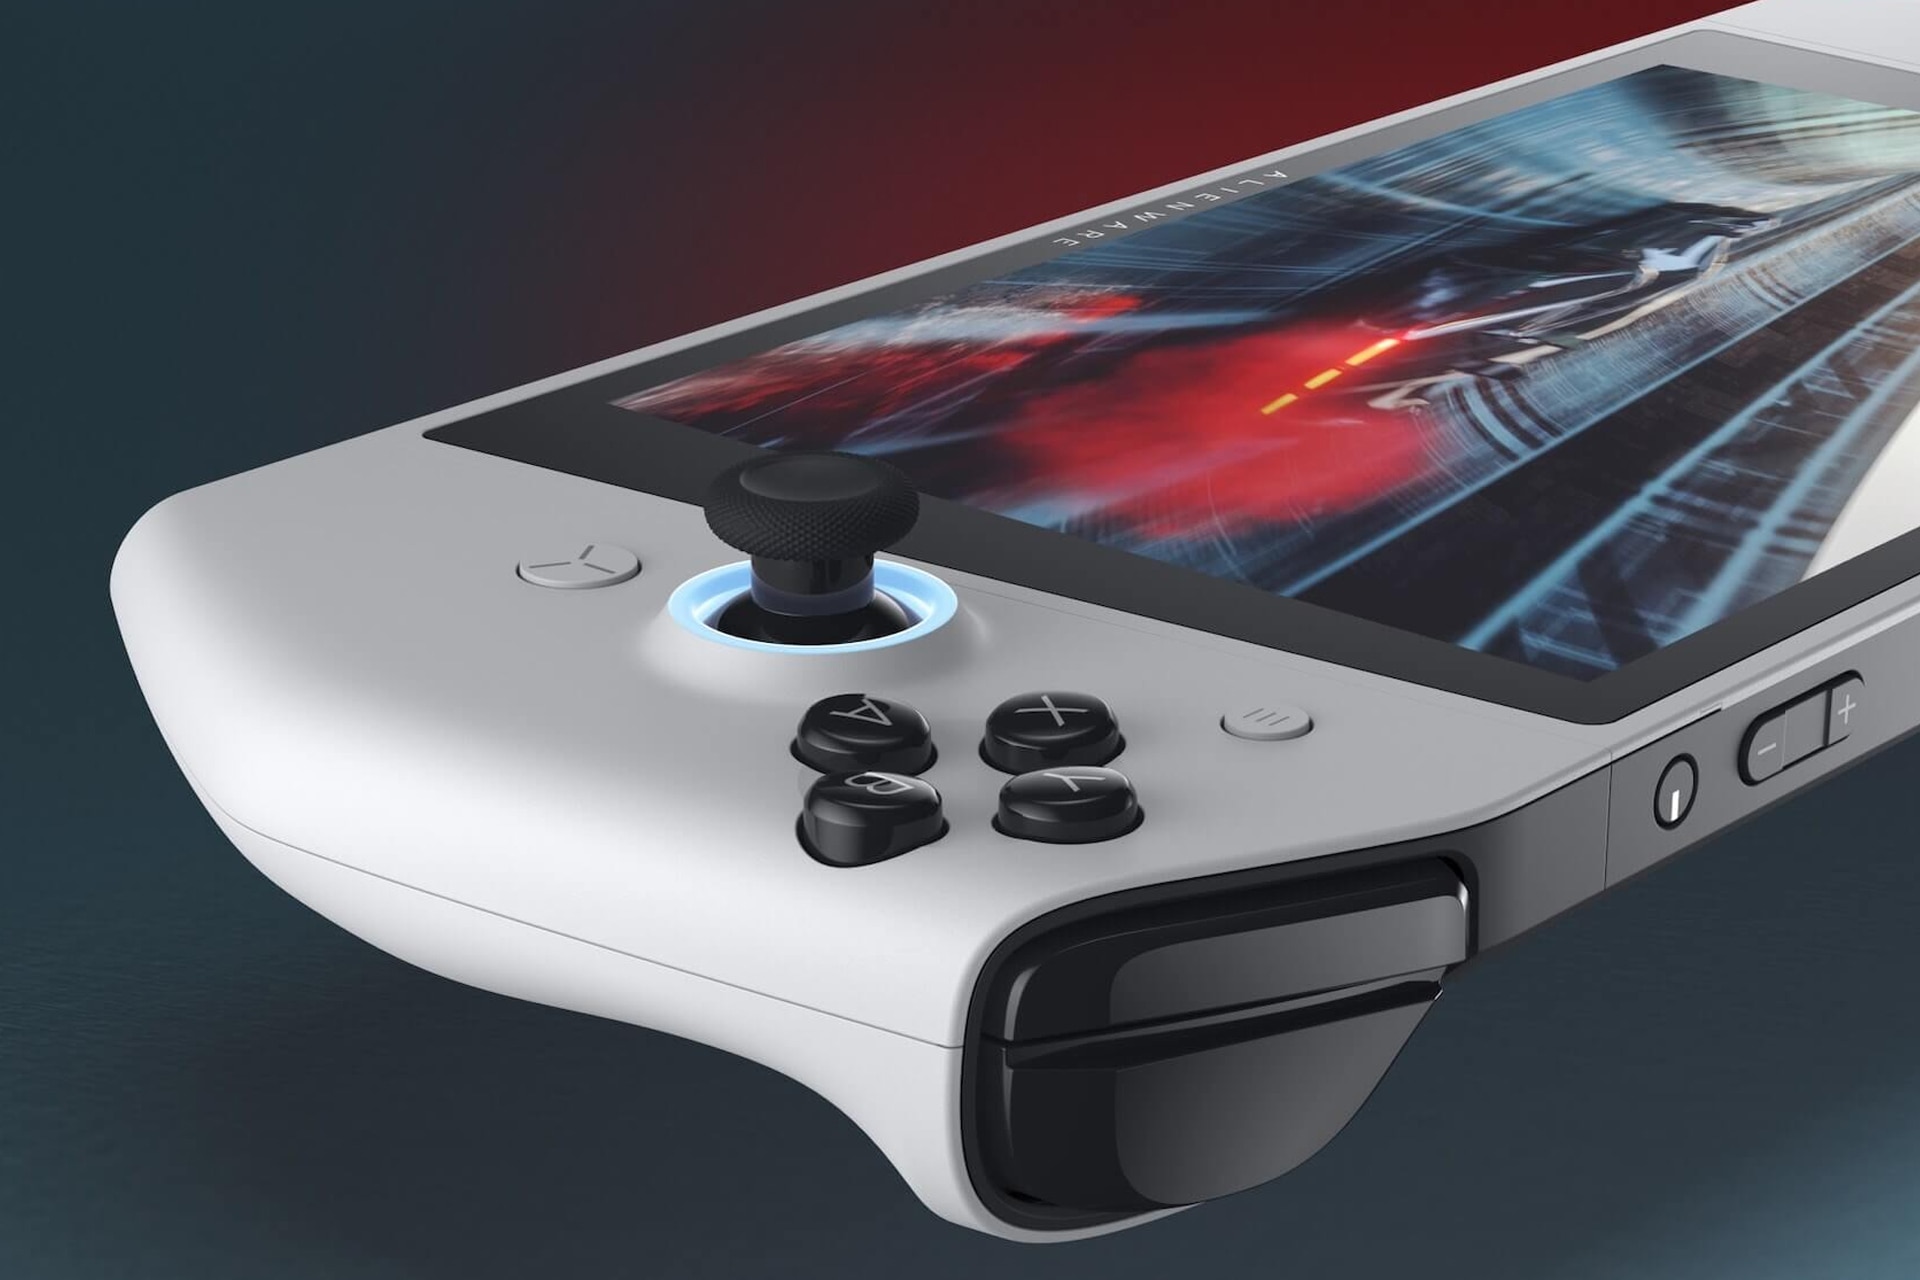 portable video game consoles